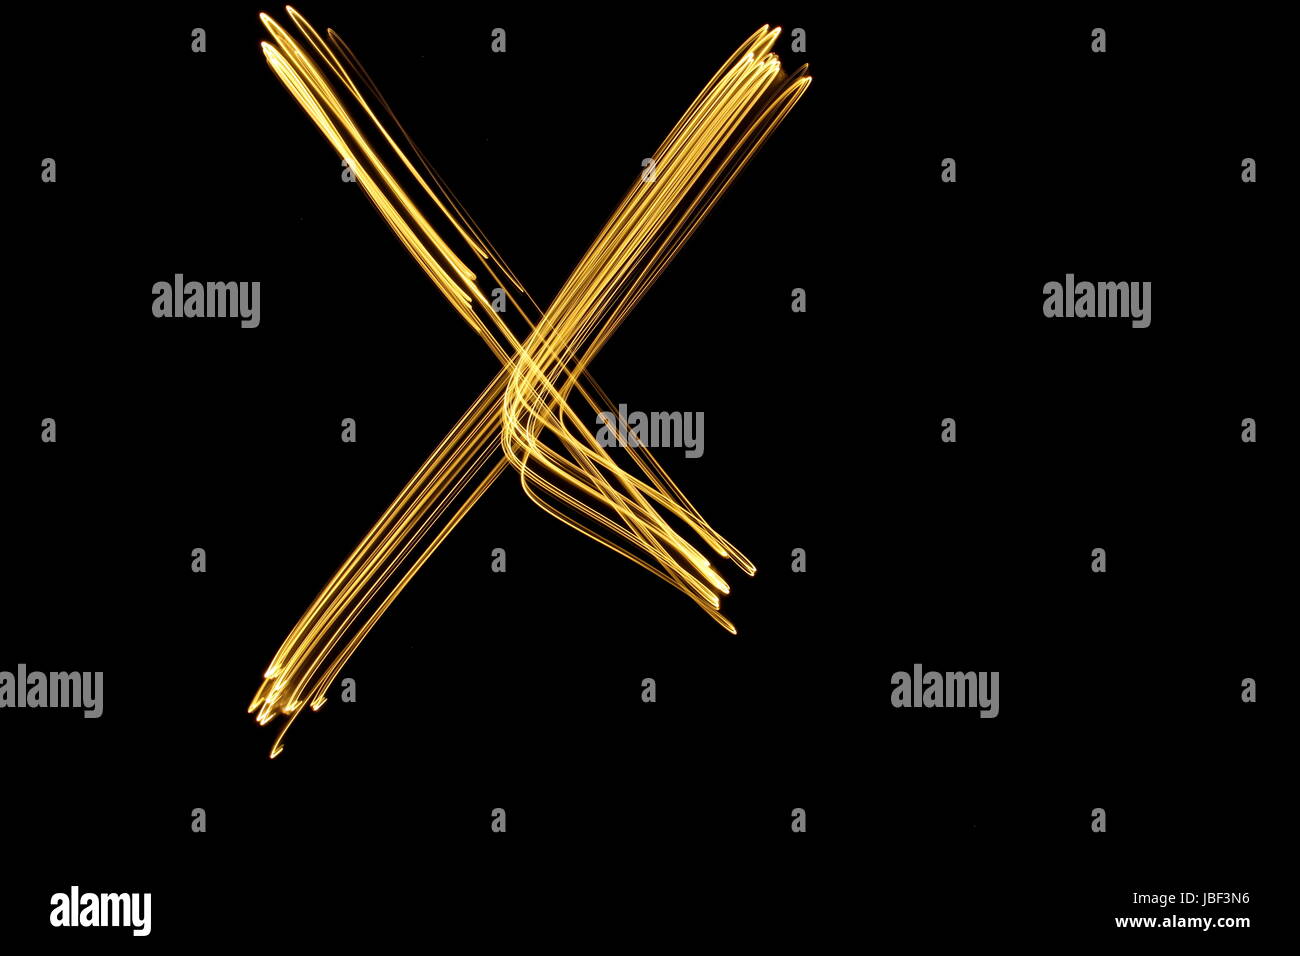 Gold letter X, Light Painting Photography, alphabet series, against a black background Stock Photo